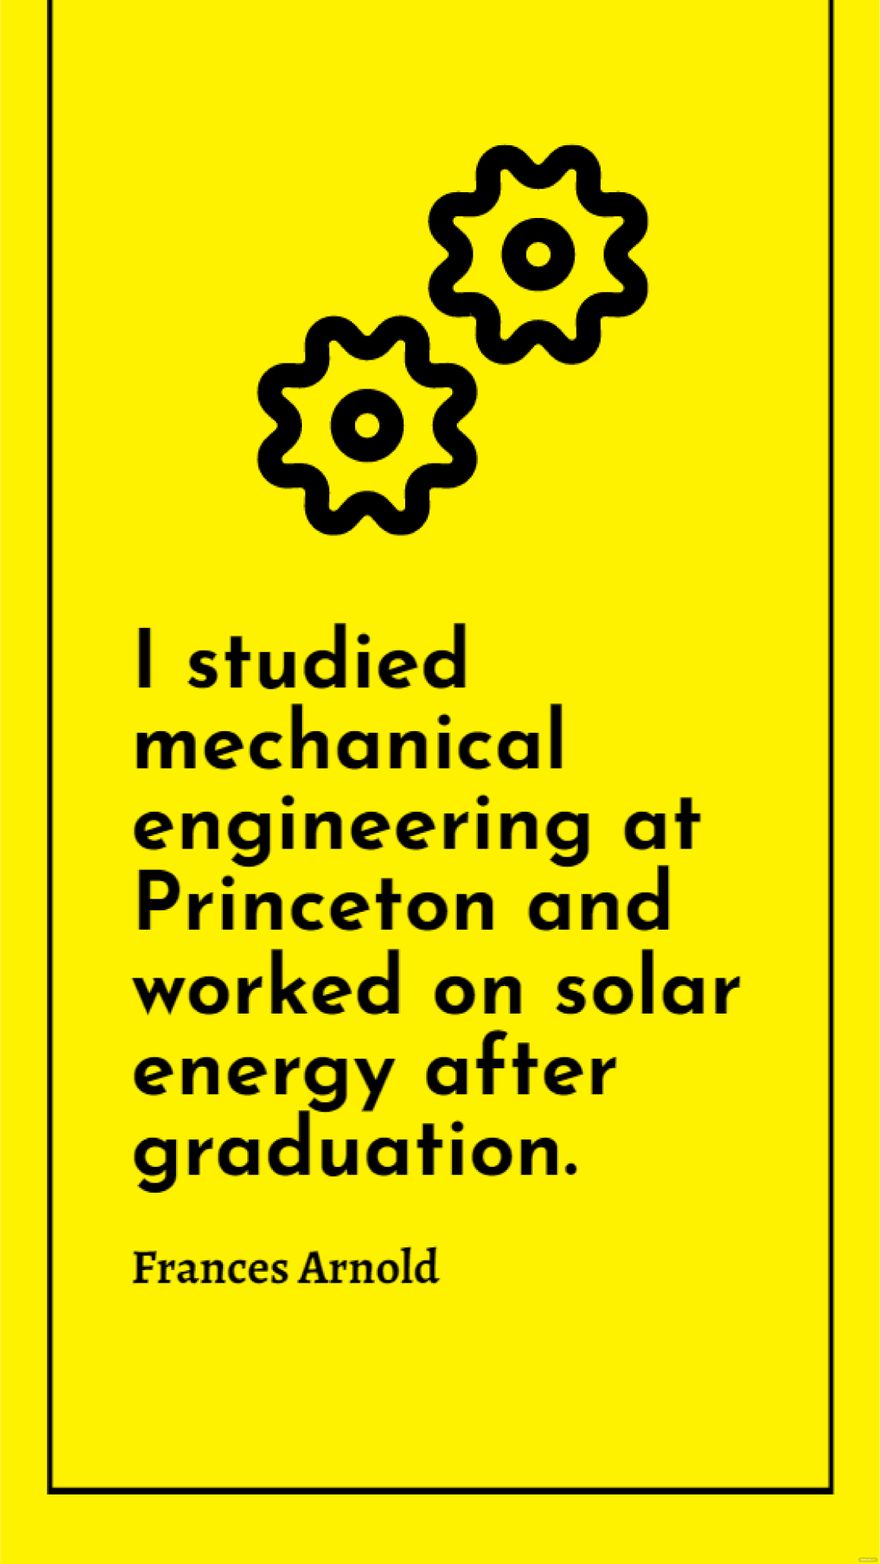 Free Frances Arnold - I studied mechanical engineering at Princeton and worked on solar energy after graduation.